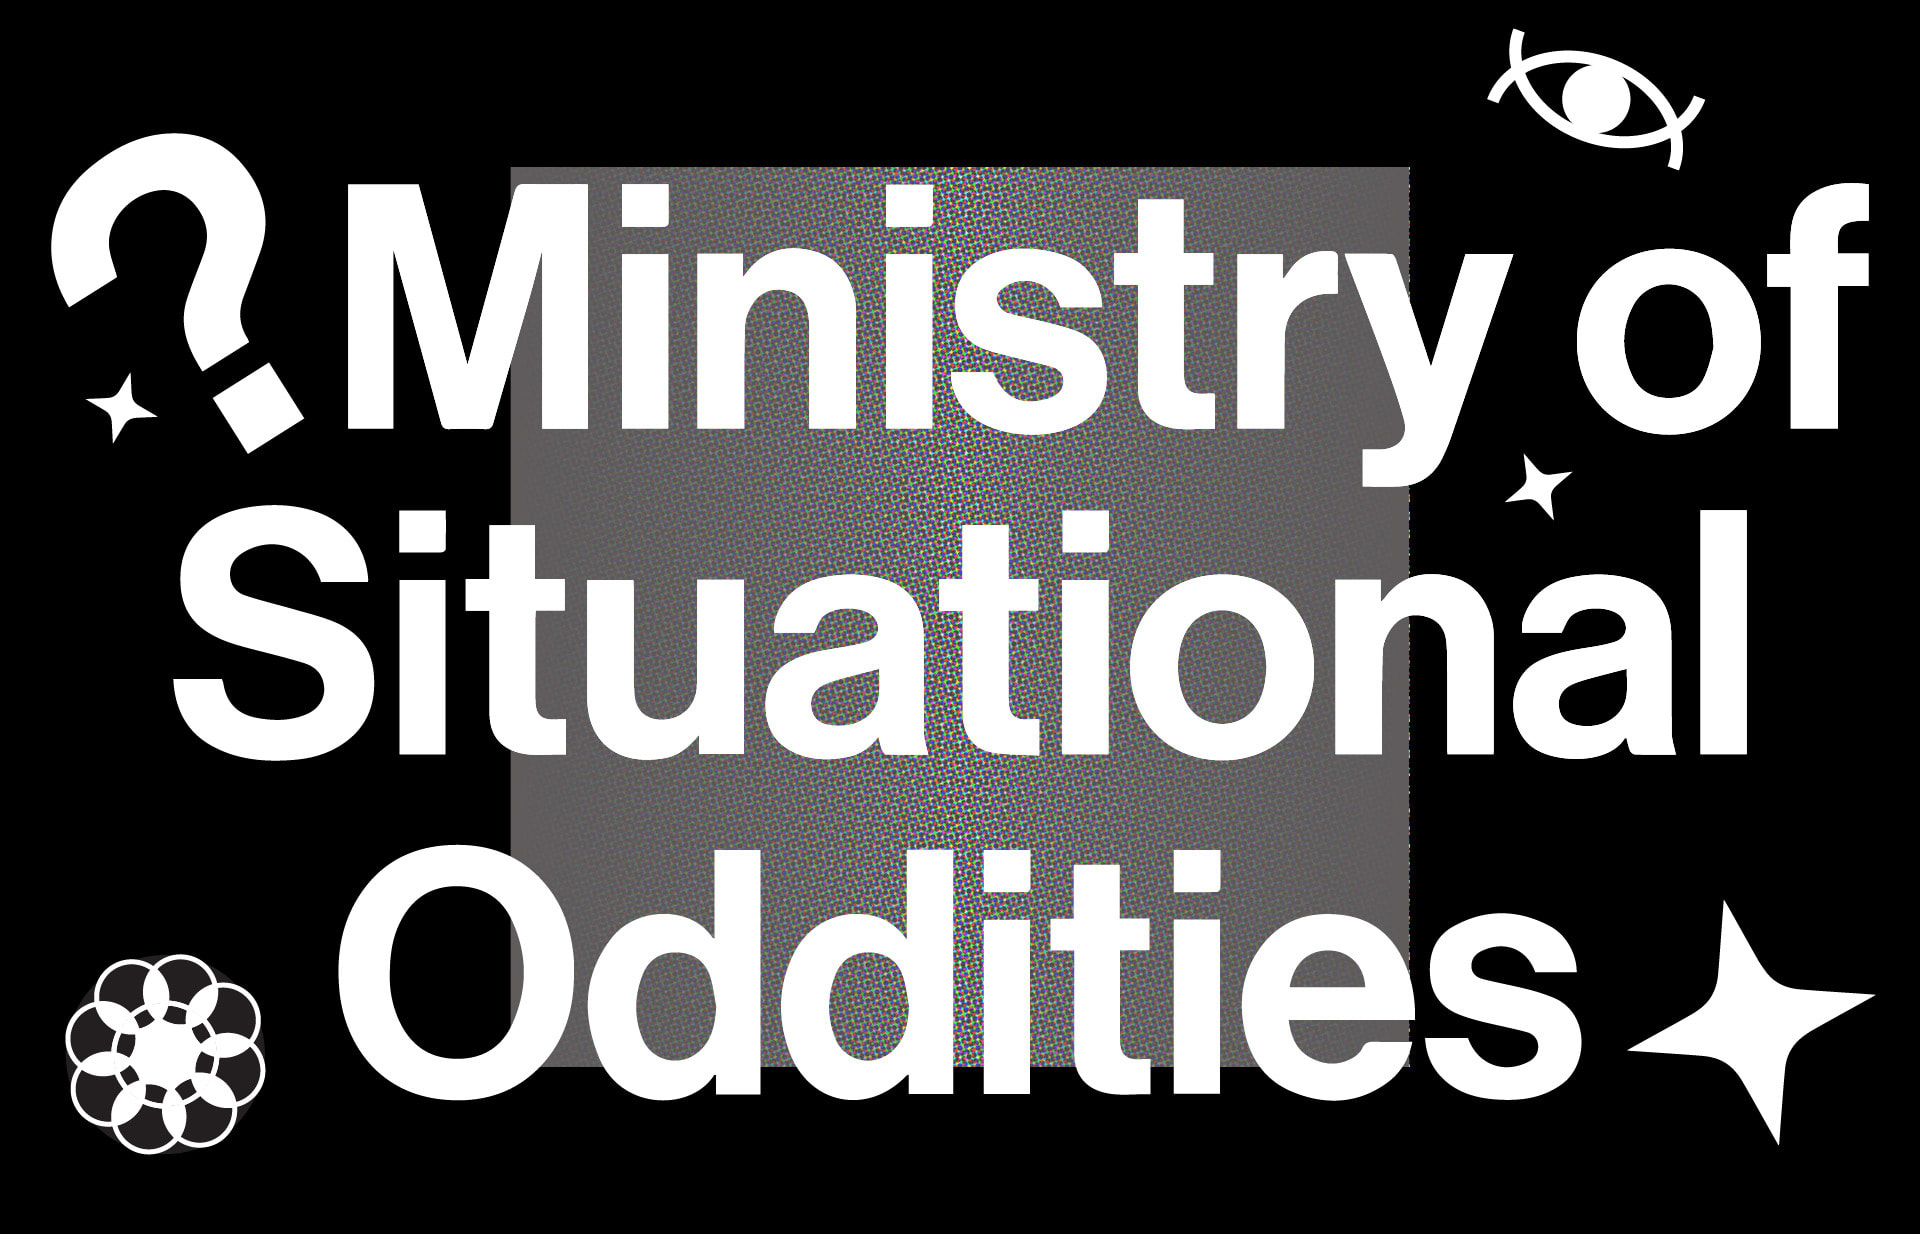 White large text covering black background. Ministry of Situational Oddities its said, with a misplaced question-mark